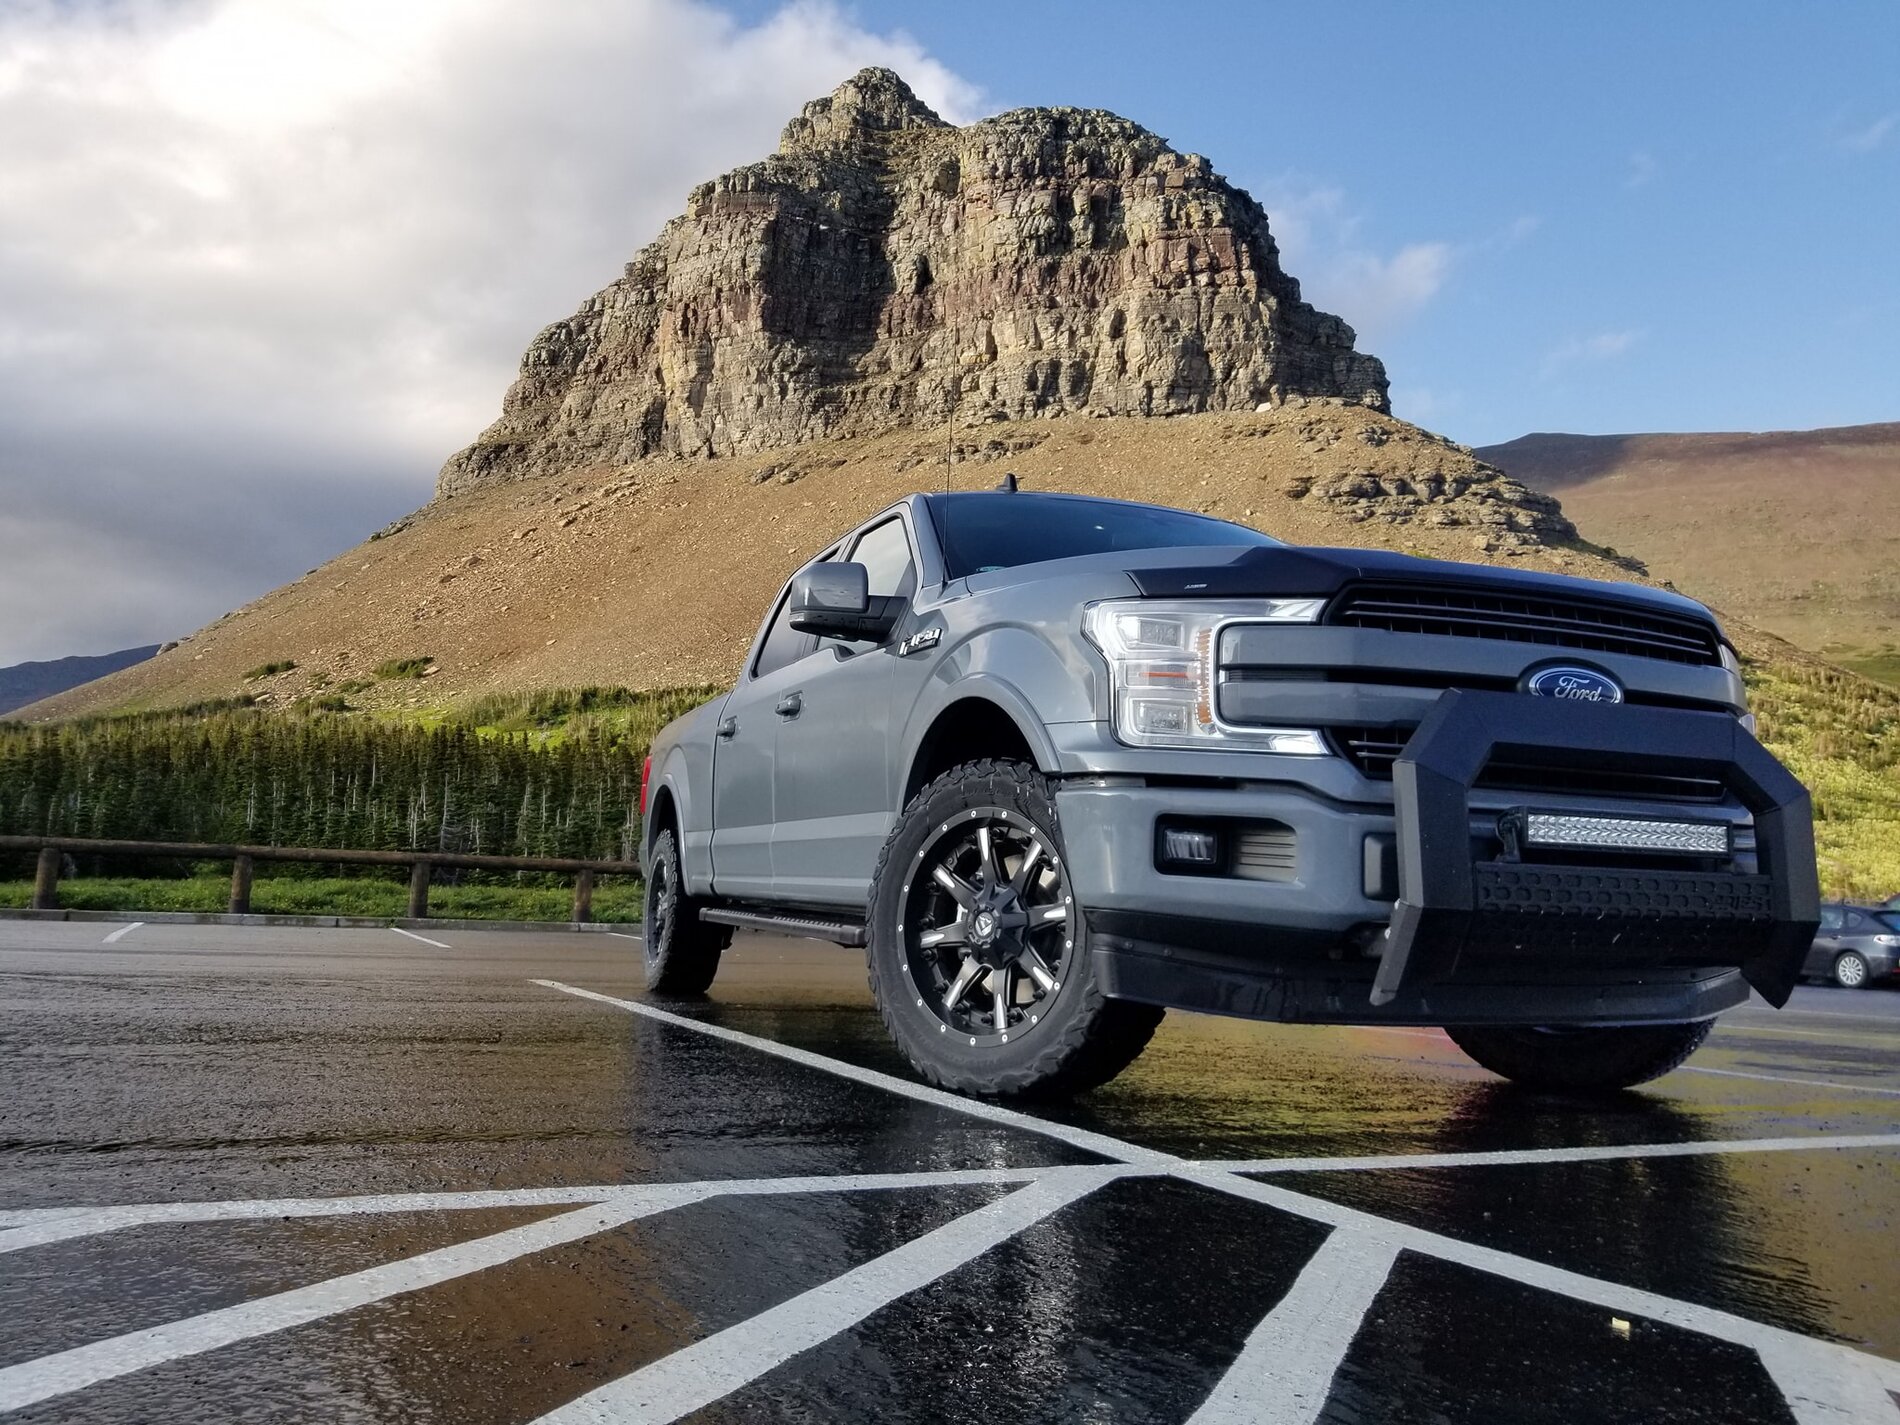 Ford F-150 Lightning What other cars/trucks have you owned? Silver